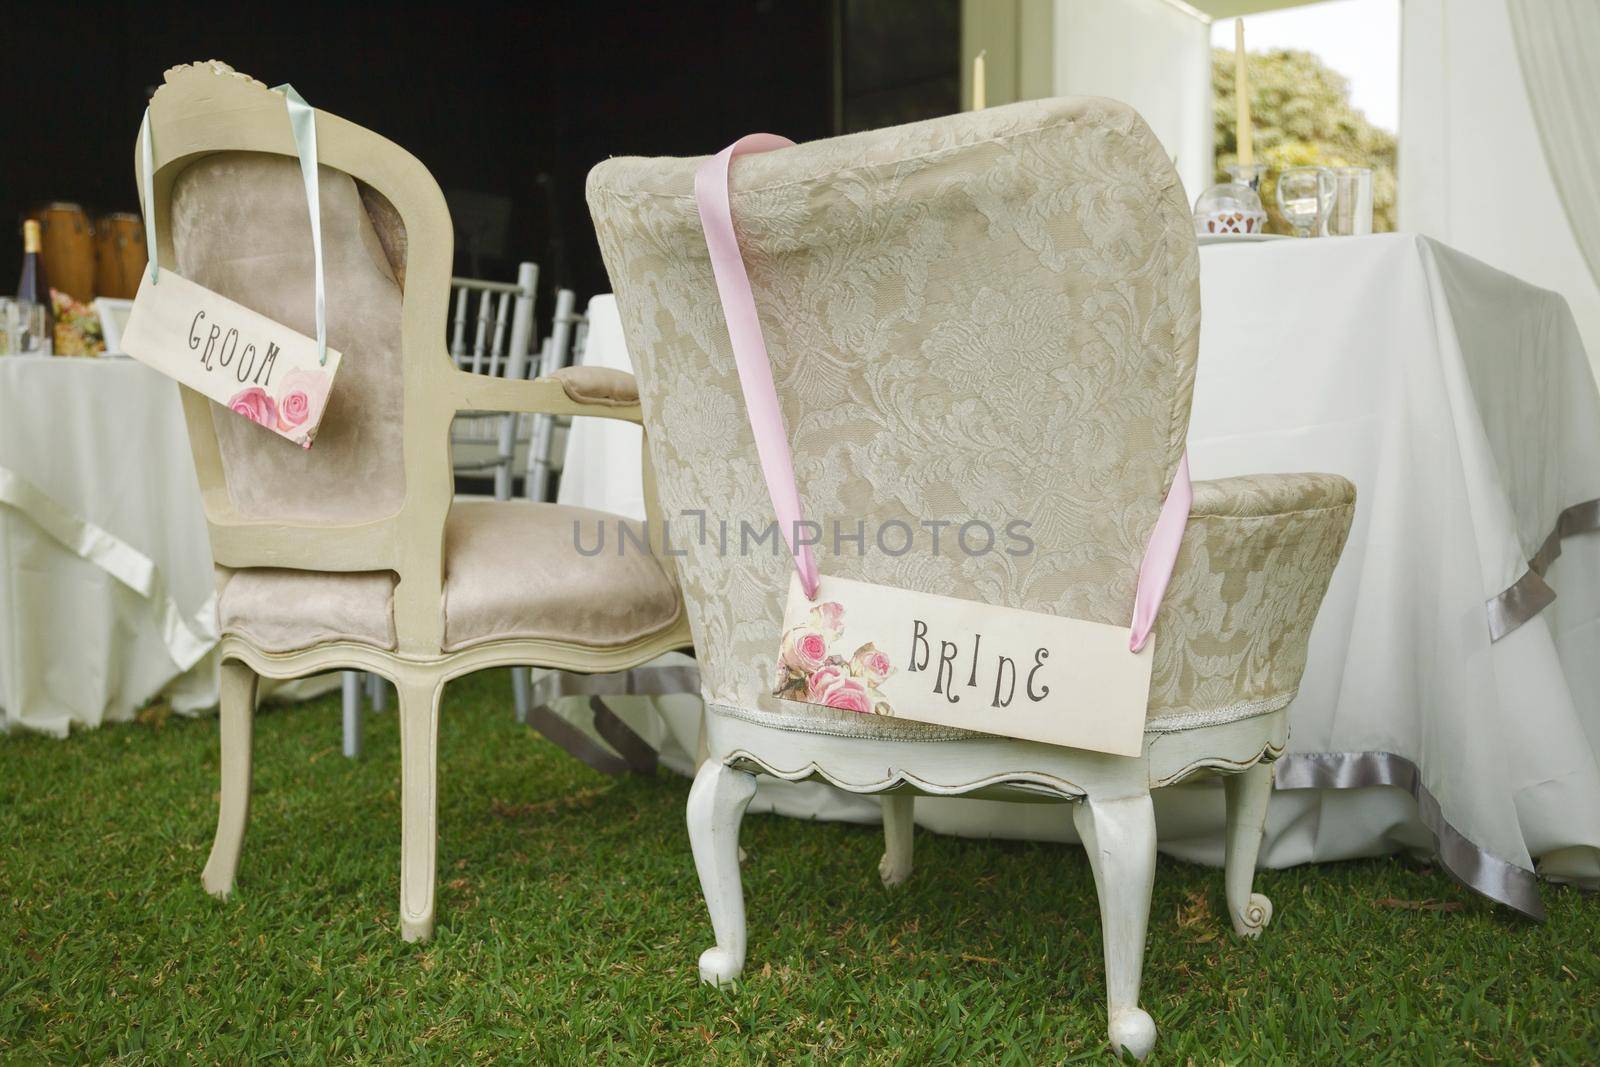 DIY chairs for bride and groom  by wondry